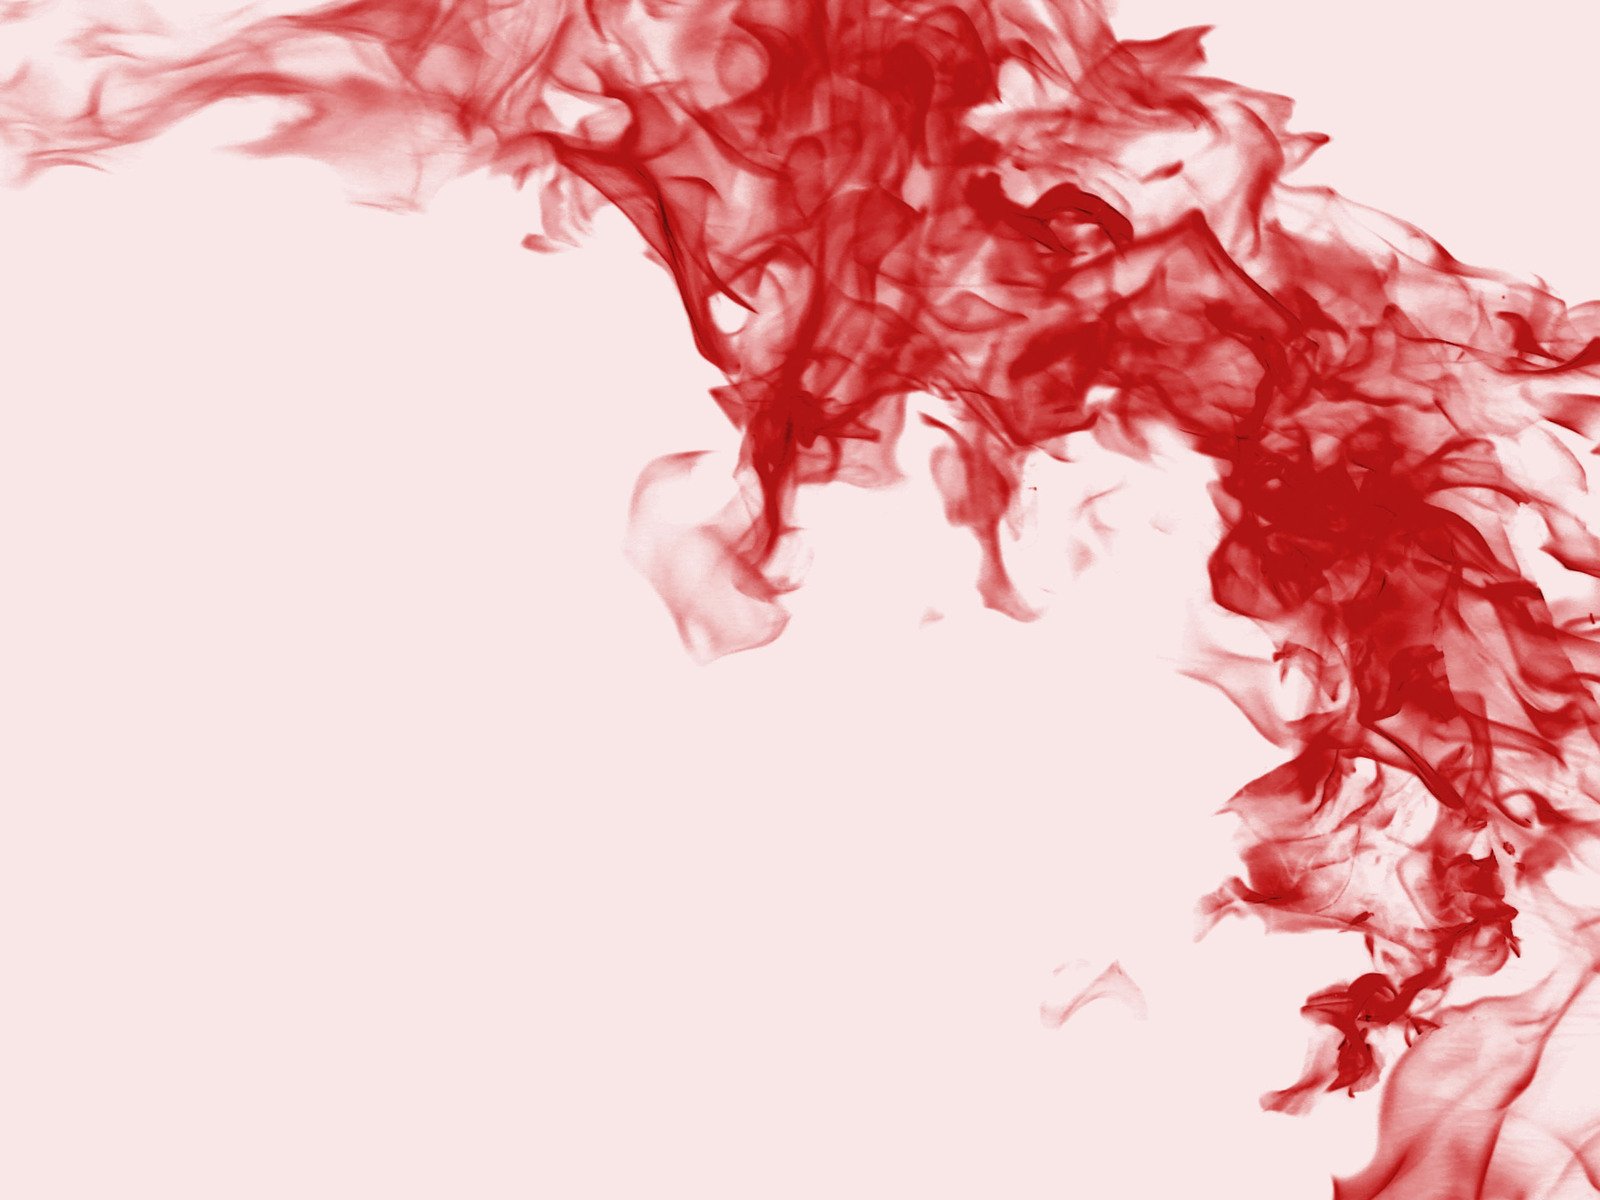 red smoke swirling from a blender to a white background